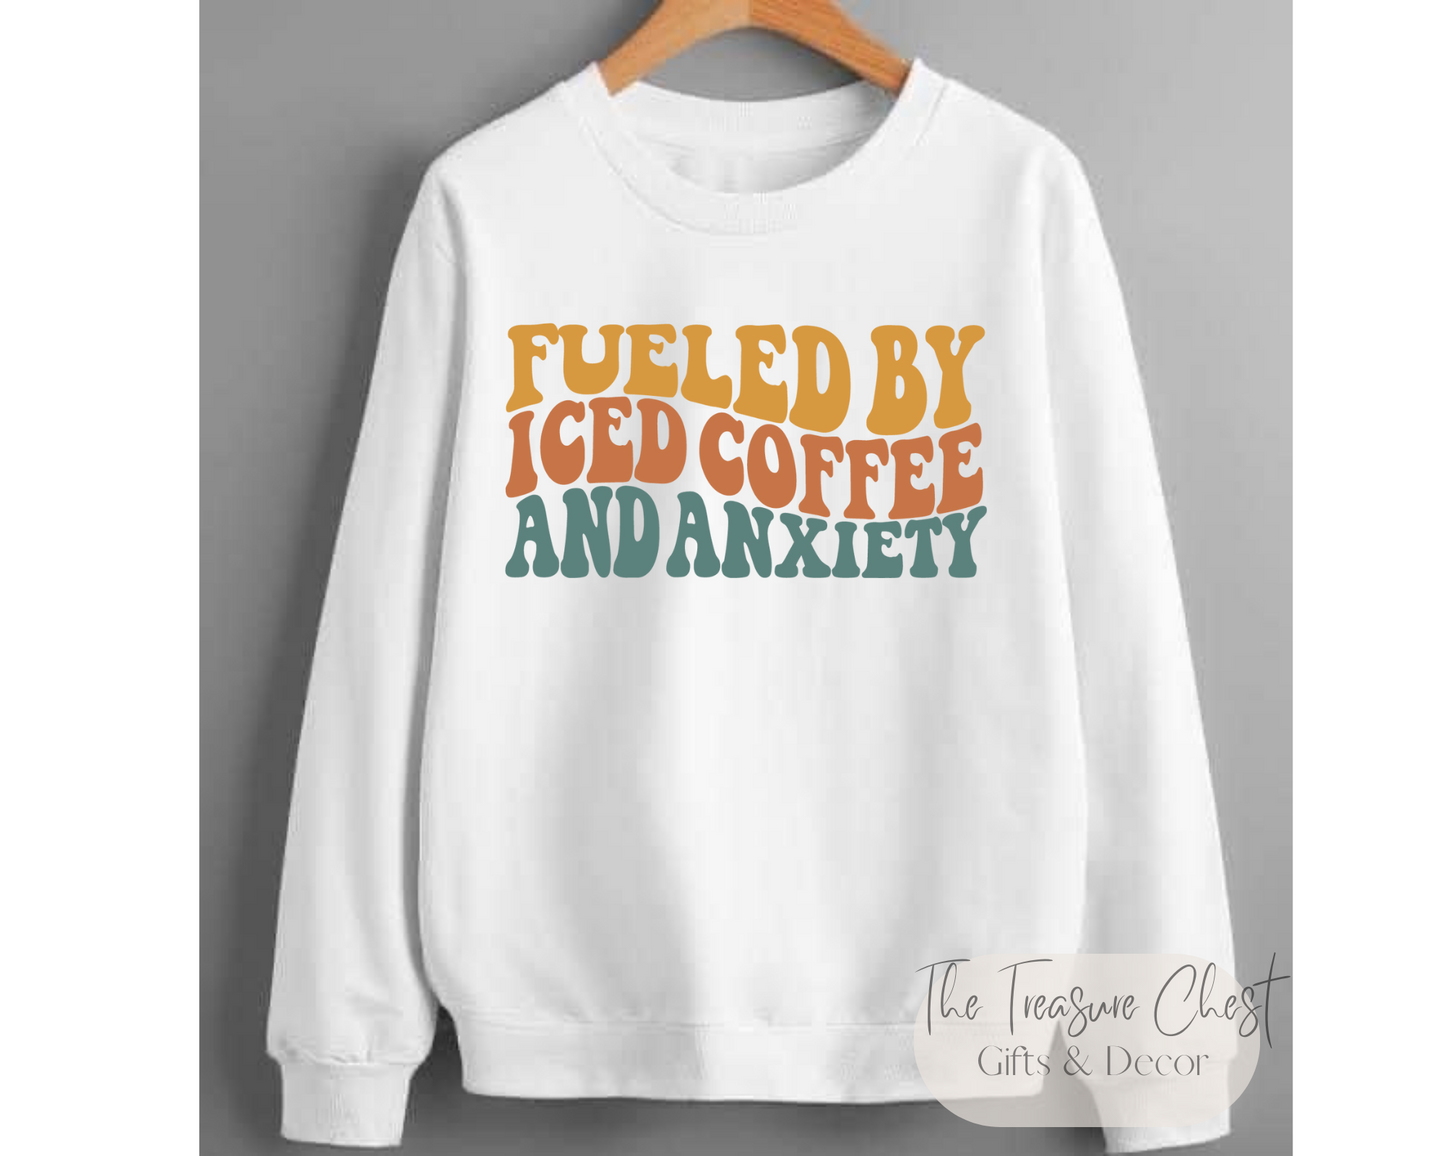 This Fueled By Iced Coffee and Anxiety Crewneck Sweatshirt is the perfect blend of comfort, style and humour. It features a design on the front that reads "fueled by iced coffee & anxiety" in bold neutral coloured lettering. The warped lettering adds some much appreciated dimension to this humorous sweatshirt. 